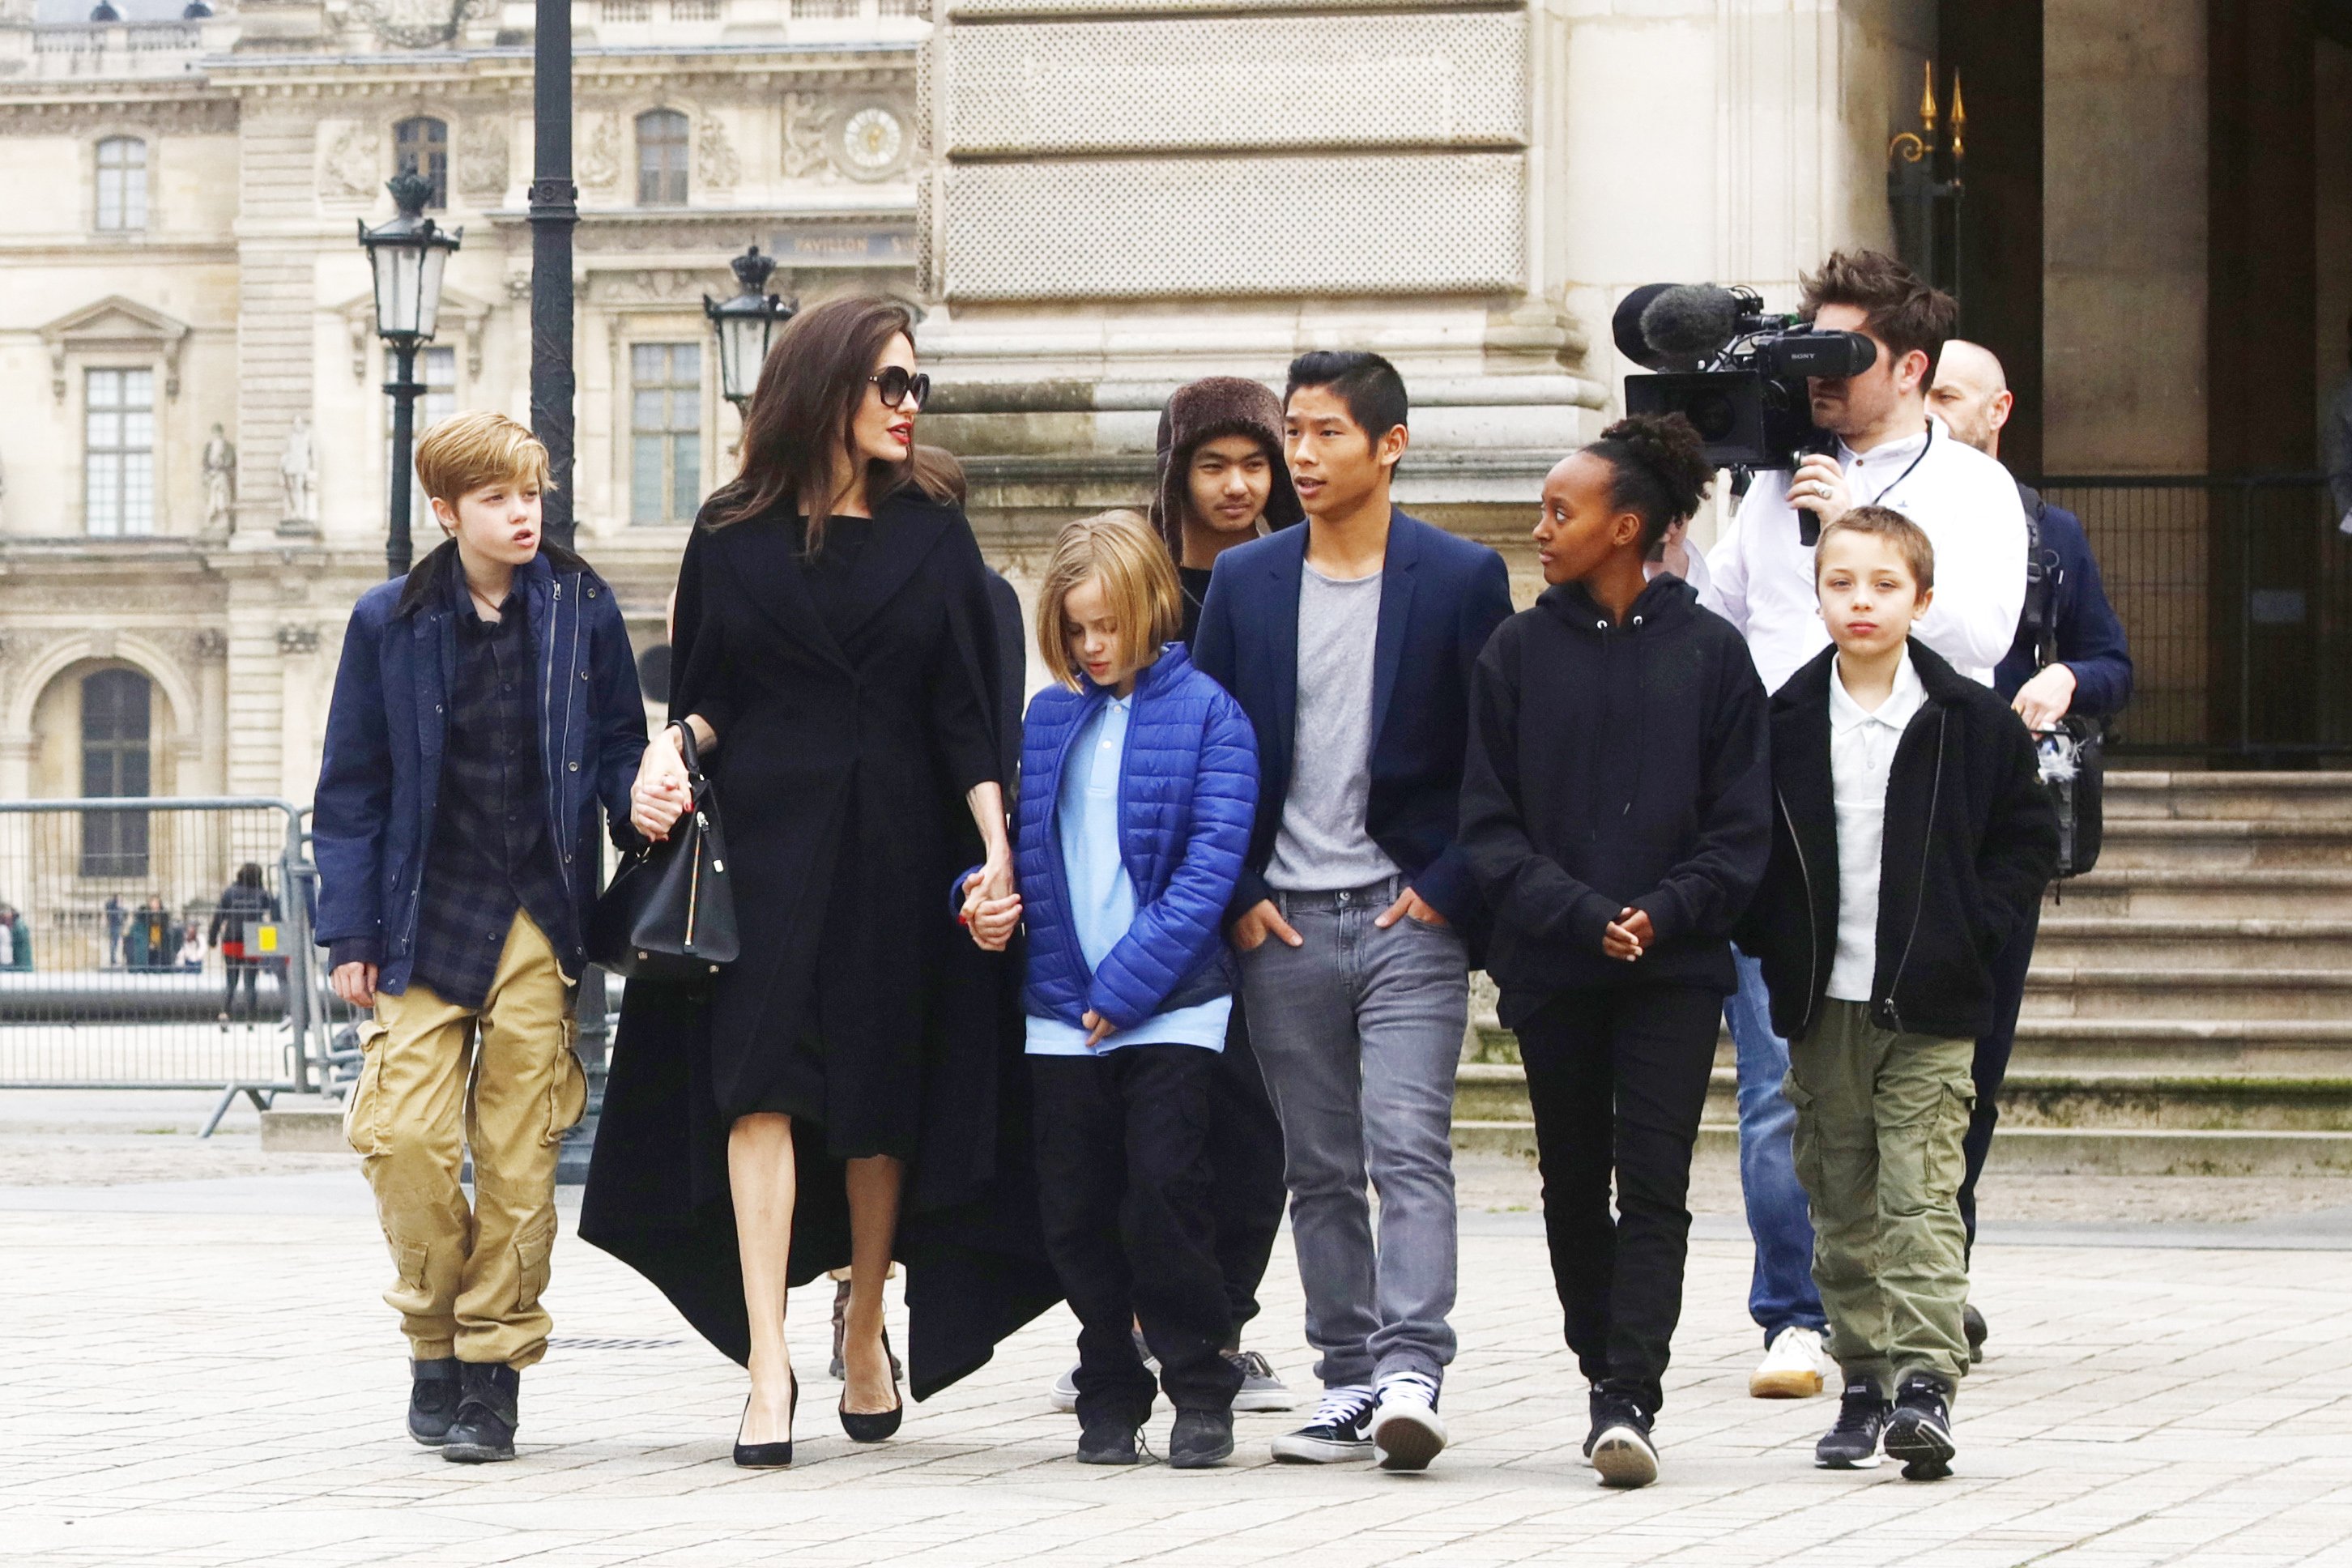 Angelina Jolie and her children Shiloh, Maddox, Vivienne Marcheline, Pax Thien, Zahara Marley, and Knox Leon Pitt Jolie at the Louvre in Paris, France, on January 30, 2017. | Source: Getty Images